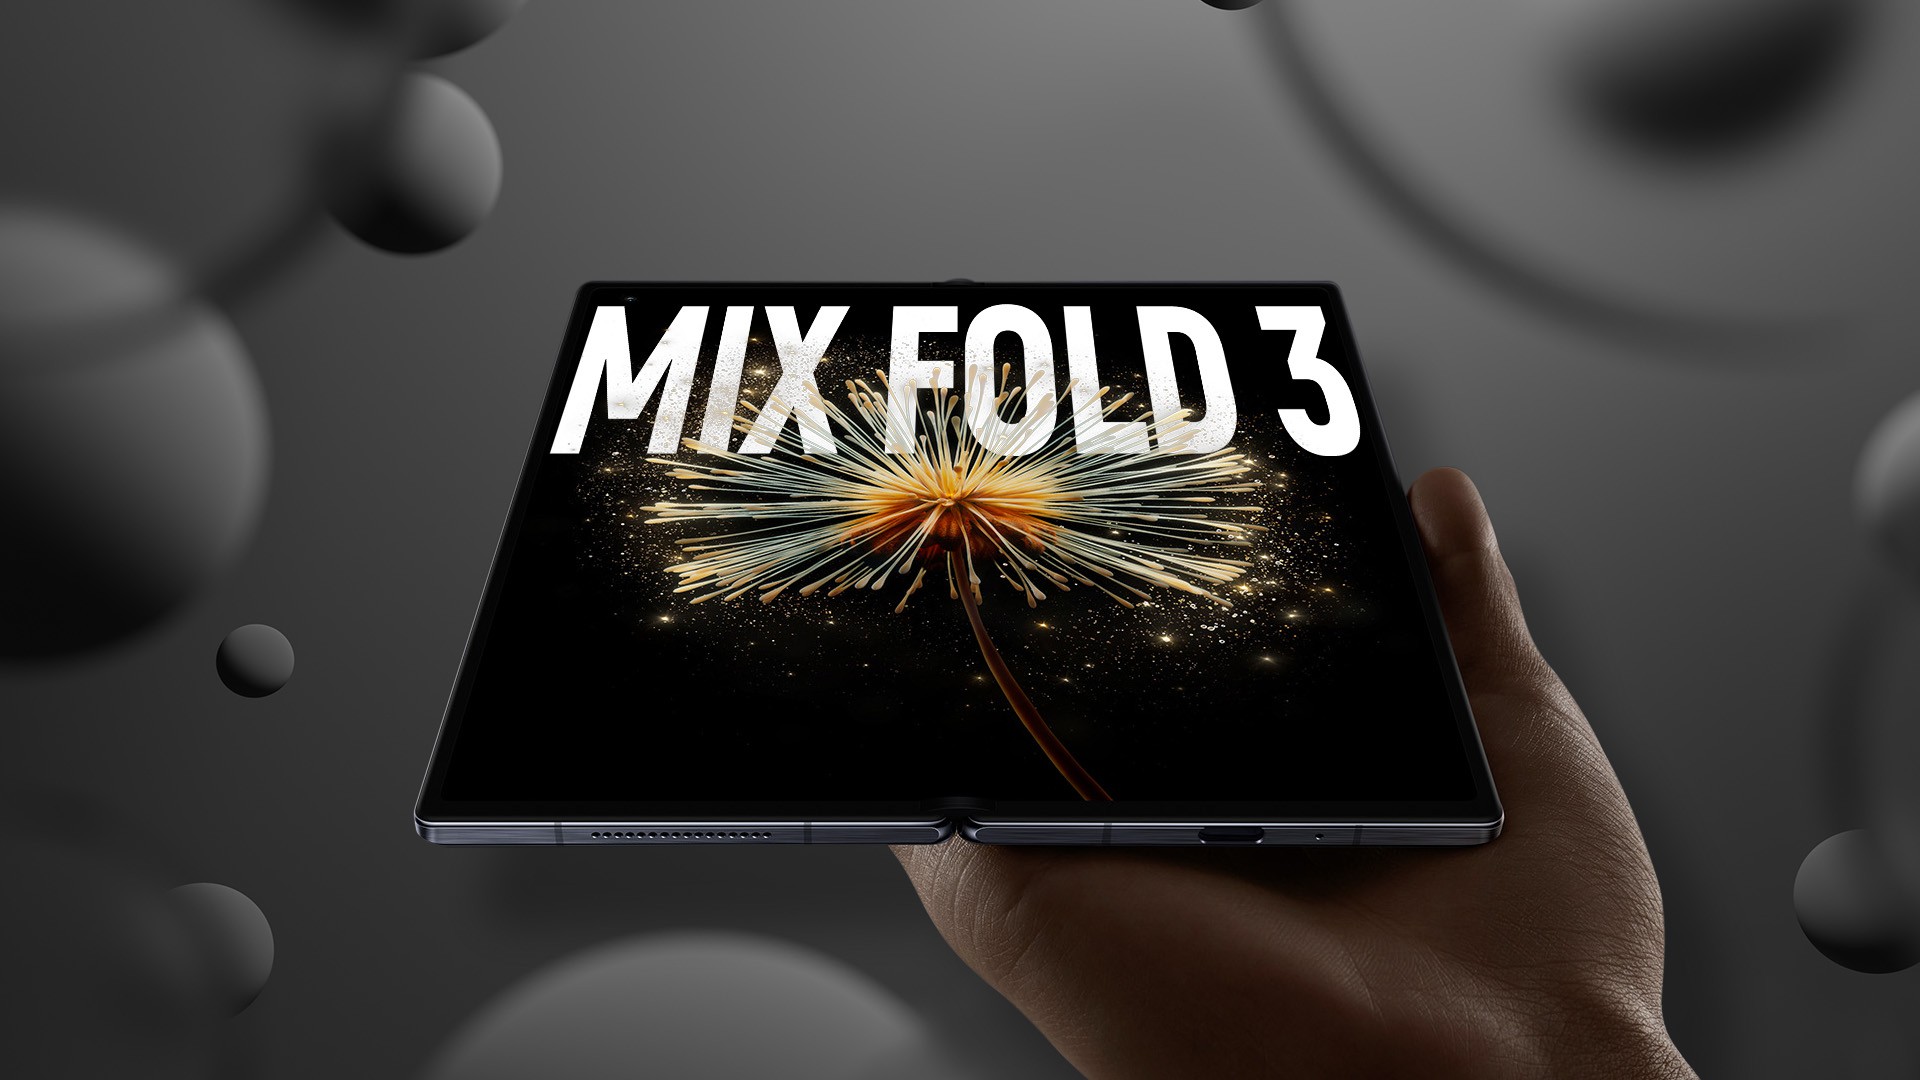 Xiaomi Mix Fold 3 launched with SD 8 Gen 2, 1TB of storage, and more